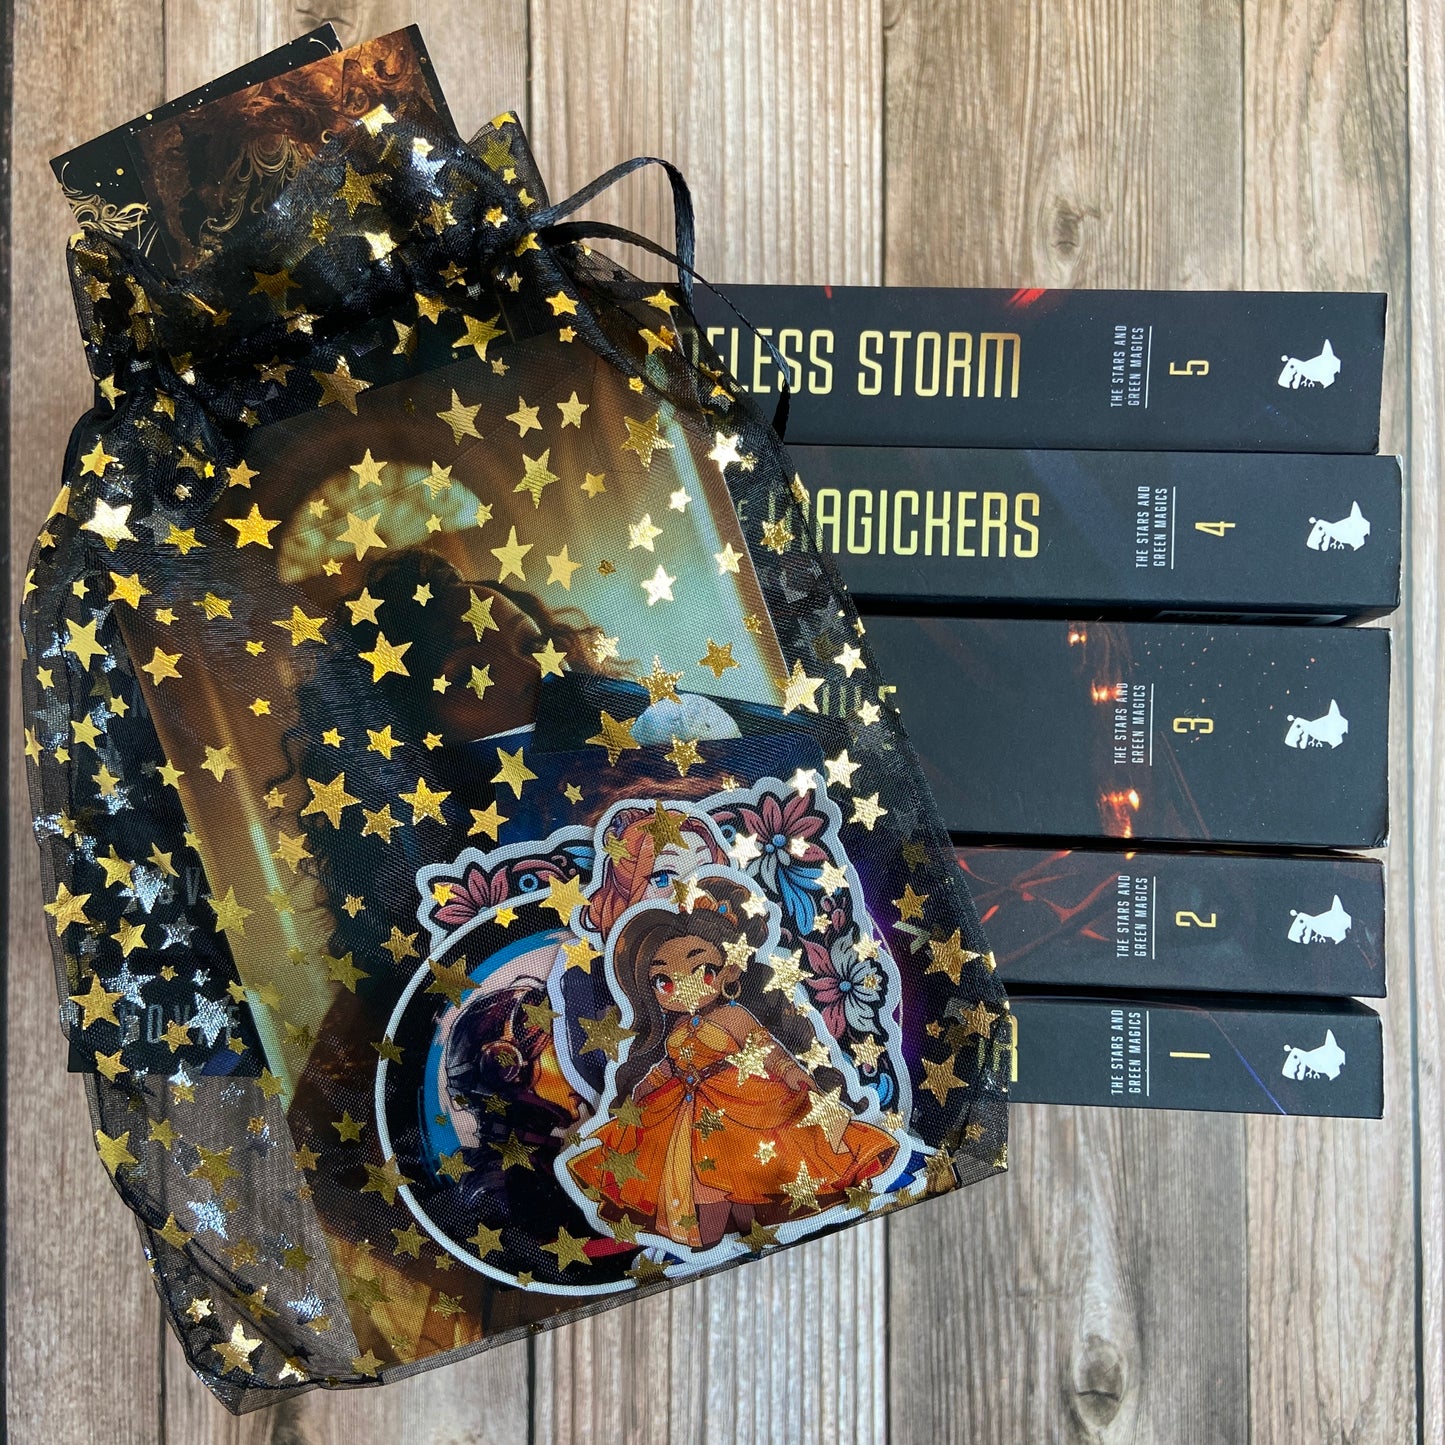 A star-patterned gift bag with an anime-style character sticker next to a Novae Caelum SIGNED Paperback Deluxe Swag Bundle: The Stars and Green Magics (Books 1-5) set of books, renowned for their sapphic arranged marriage plot, rests on a wooden surface.